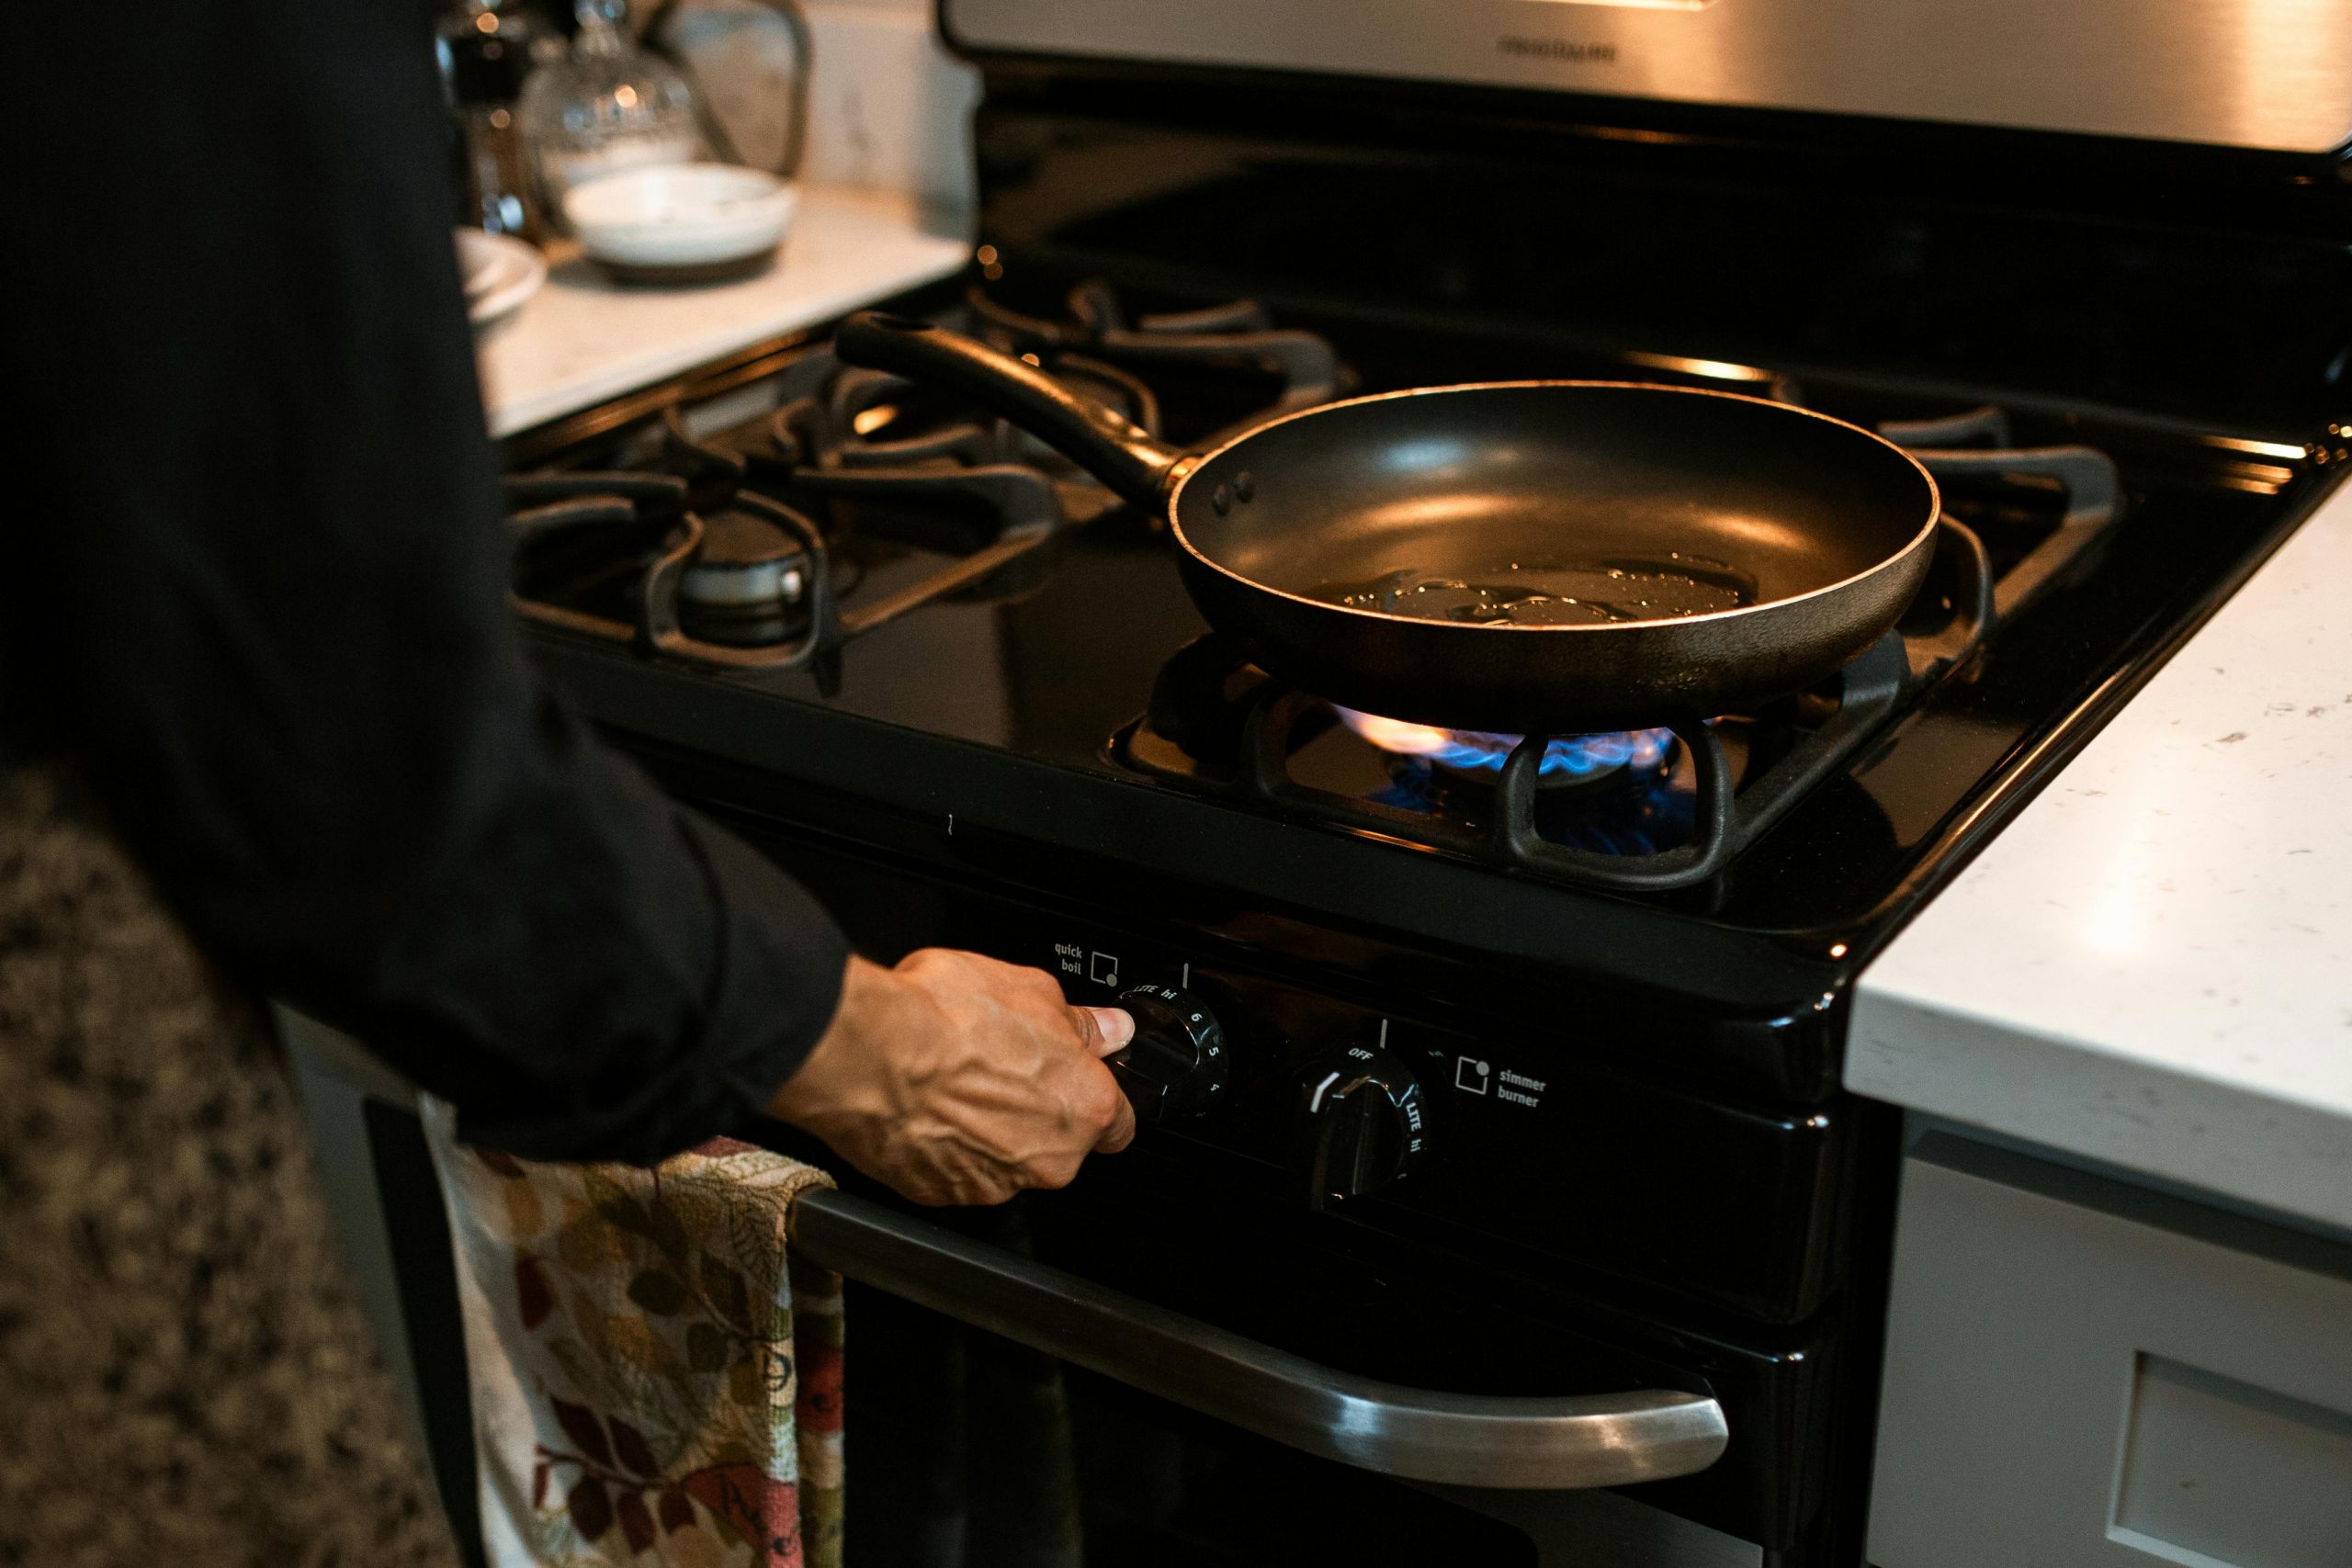 A person uses a non-stick pan in their kitchen